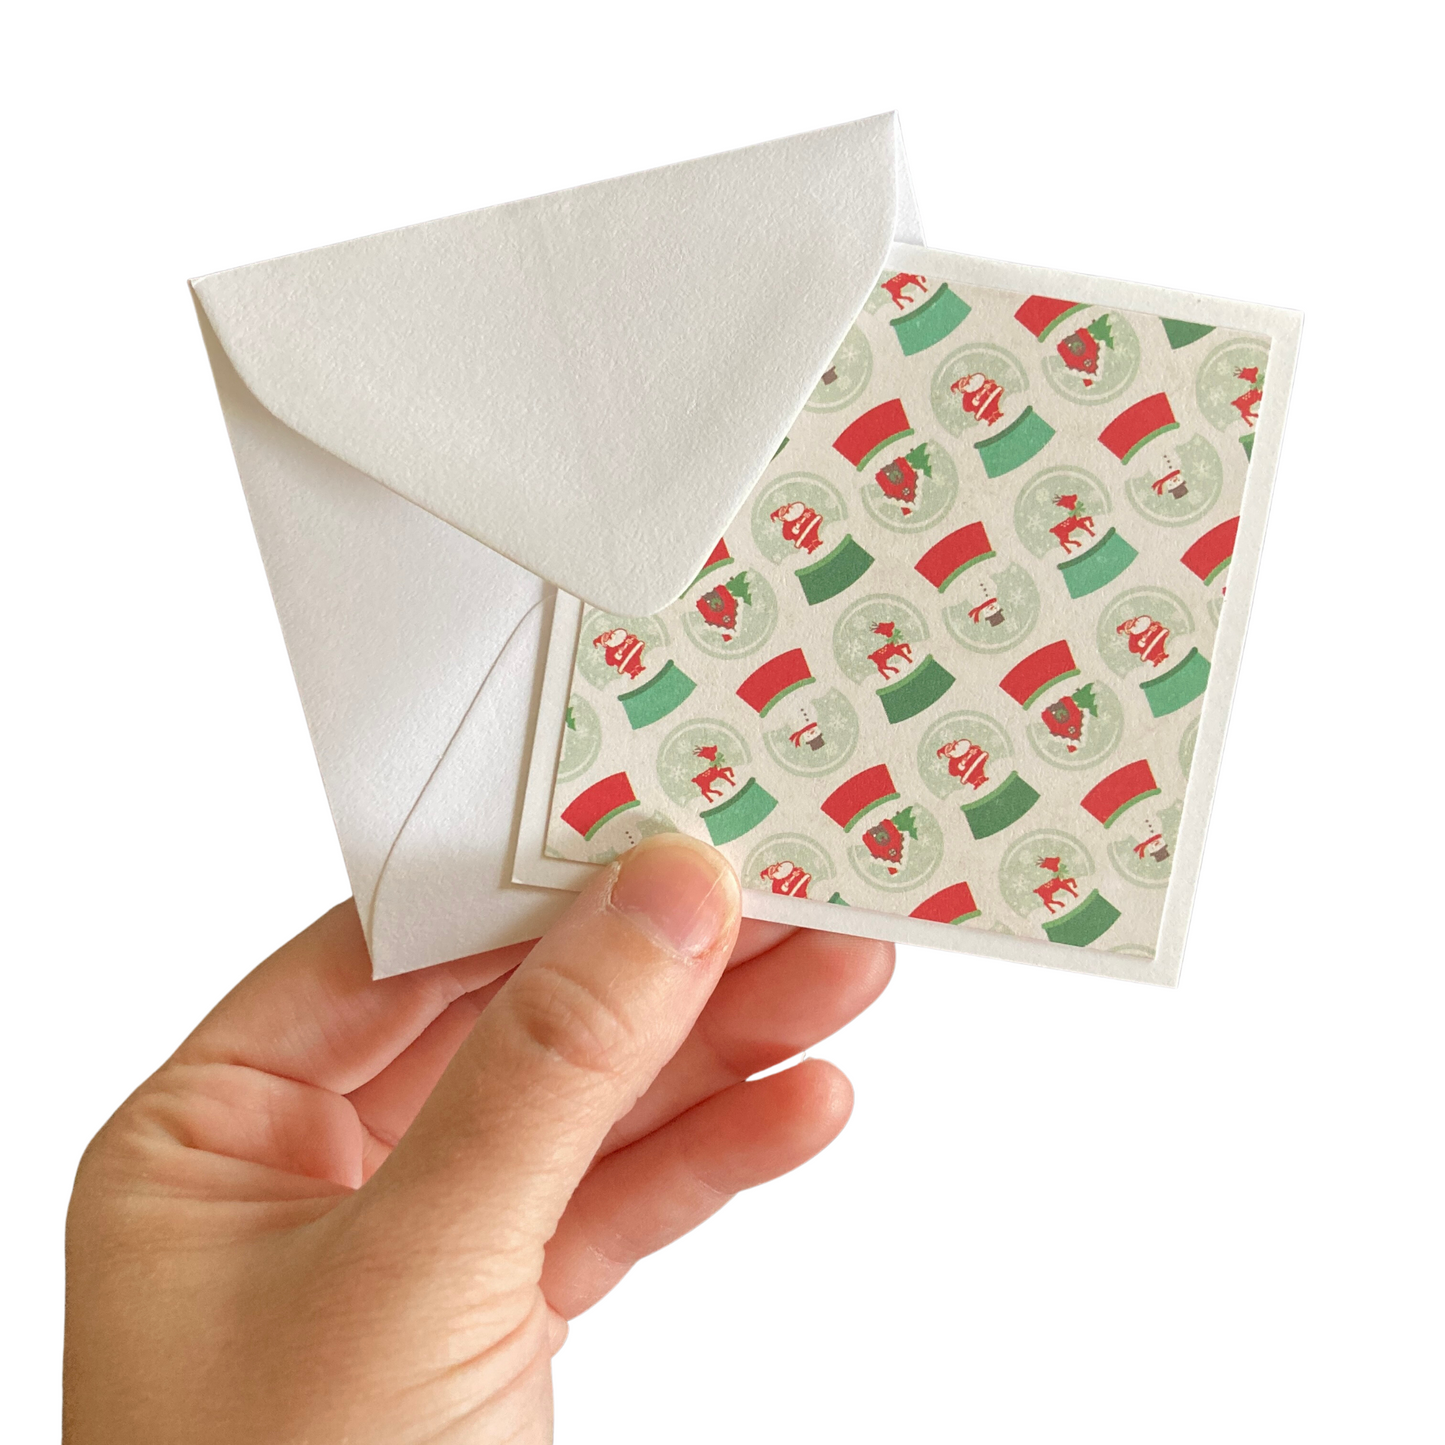 3x3 Christmas Cheer Note Cards